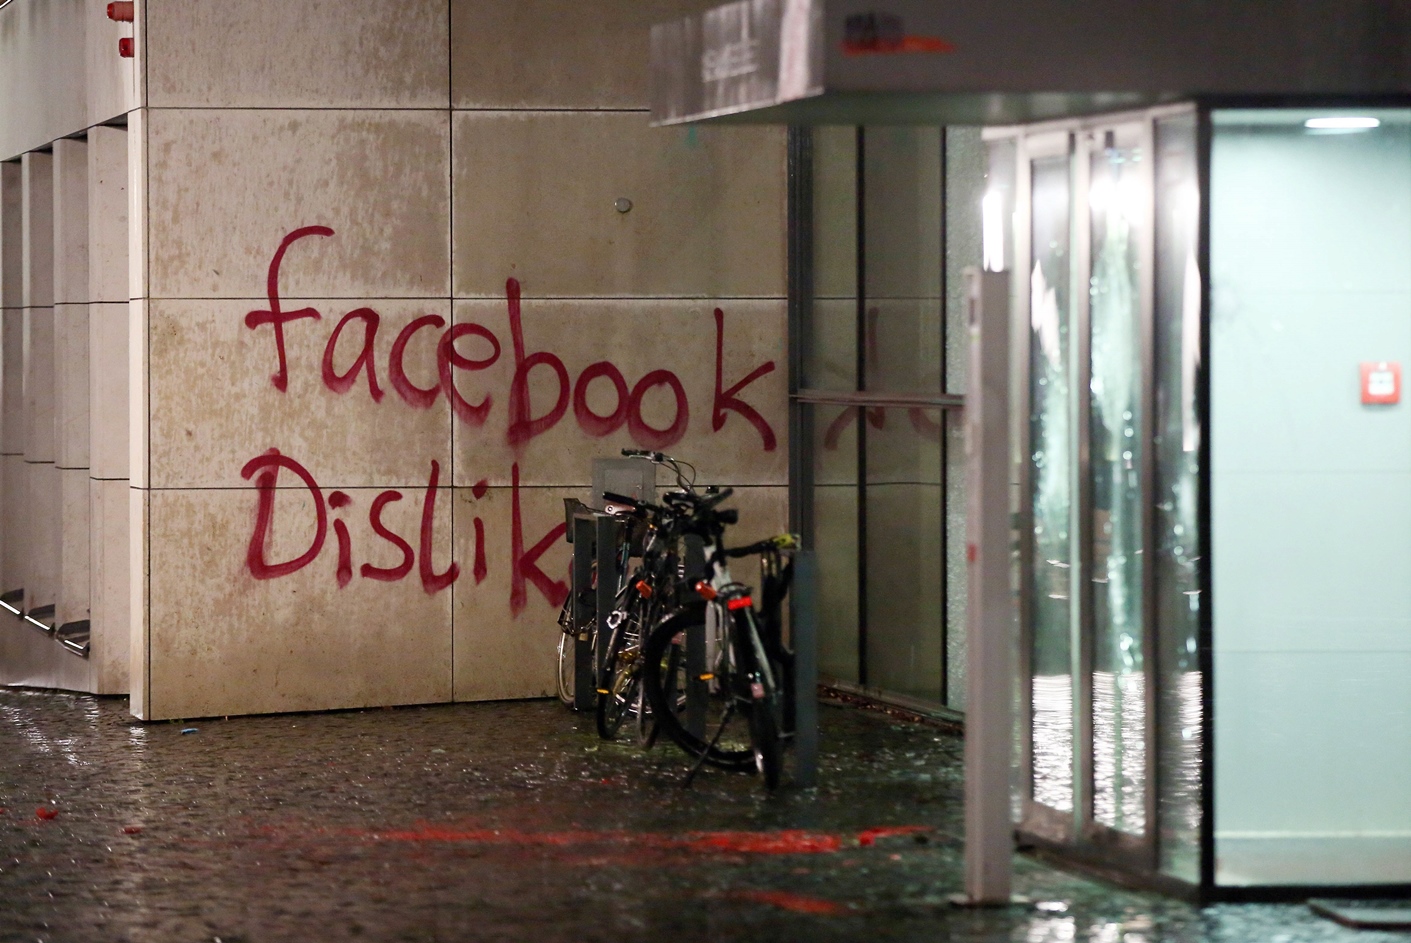 the message quot facebook dislike quot is written on the wall of a building where us social media giant facebook has its german headquarters in hamburg northern germany on december 13 2015 photo afp